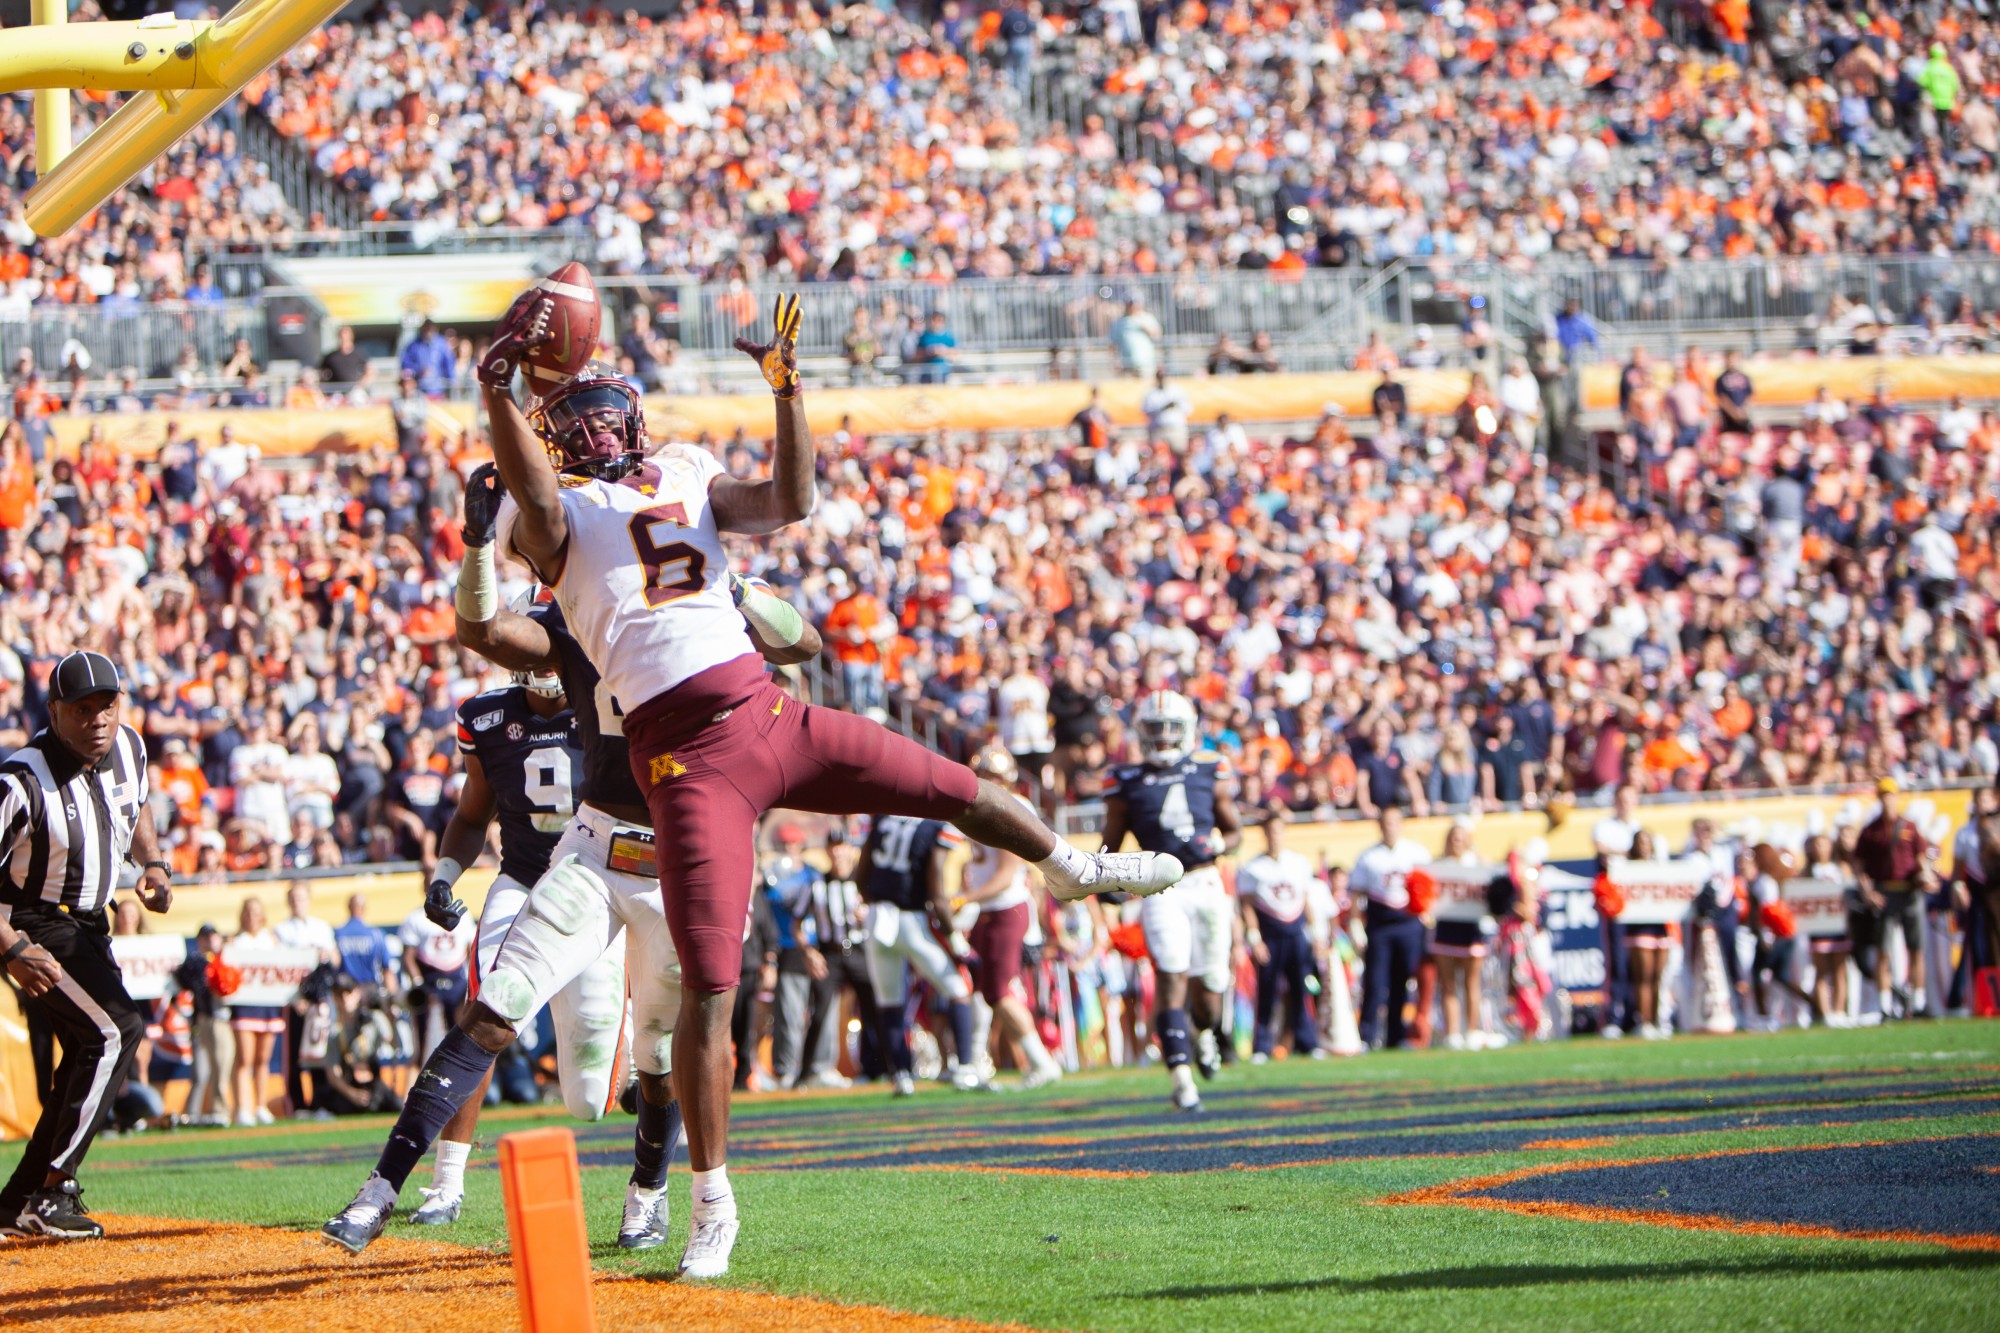 Gophers Wide Receiver Tyler Johnson receives a pass in the endzone at Raymond James Stadium in Tampa, Florida on Wednesday, Jan. 1. Minnesota holds a 24-17 lead over Auburn heading into the third quarter of the Outback Bowl. (Kamaan Richards / Minnesota Daily)